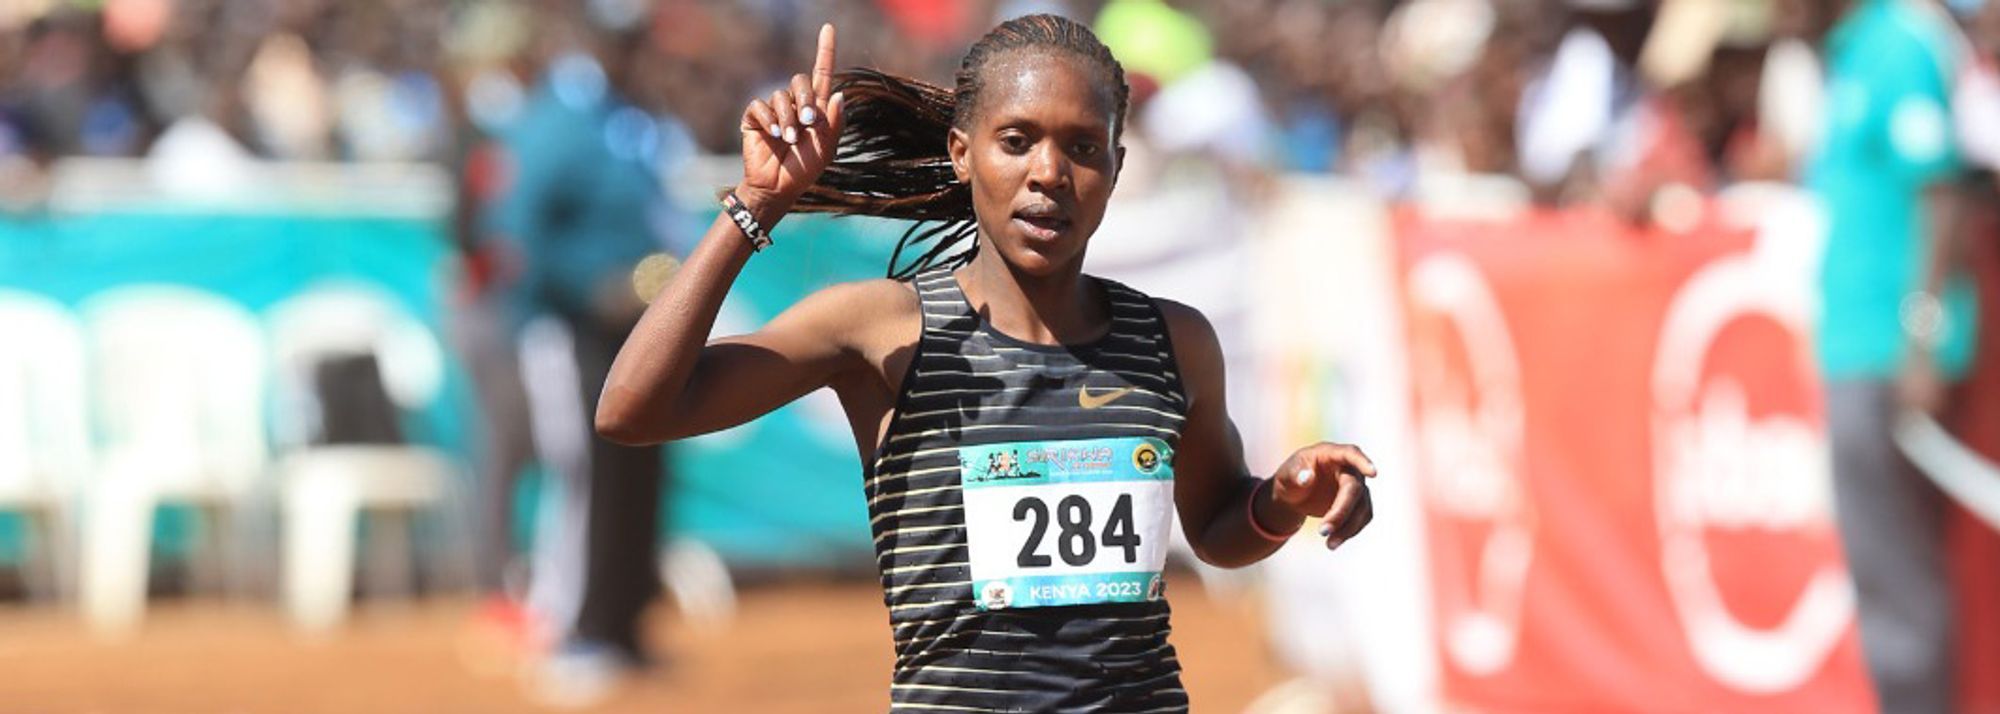 Faith Kipyegon delighted fans with a dominant women’s race win, while Charles Lokir triumphed to take the men’s title at the World Athletics Cross Country Tour Gold event